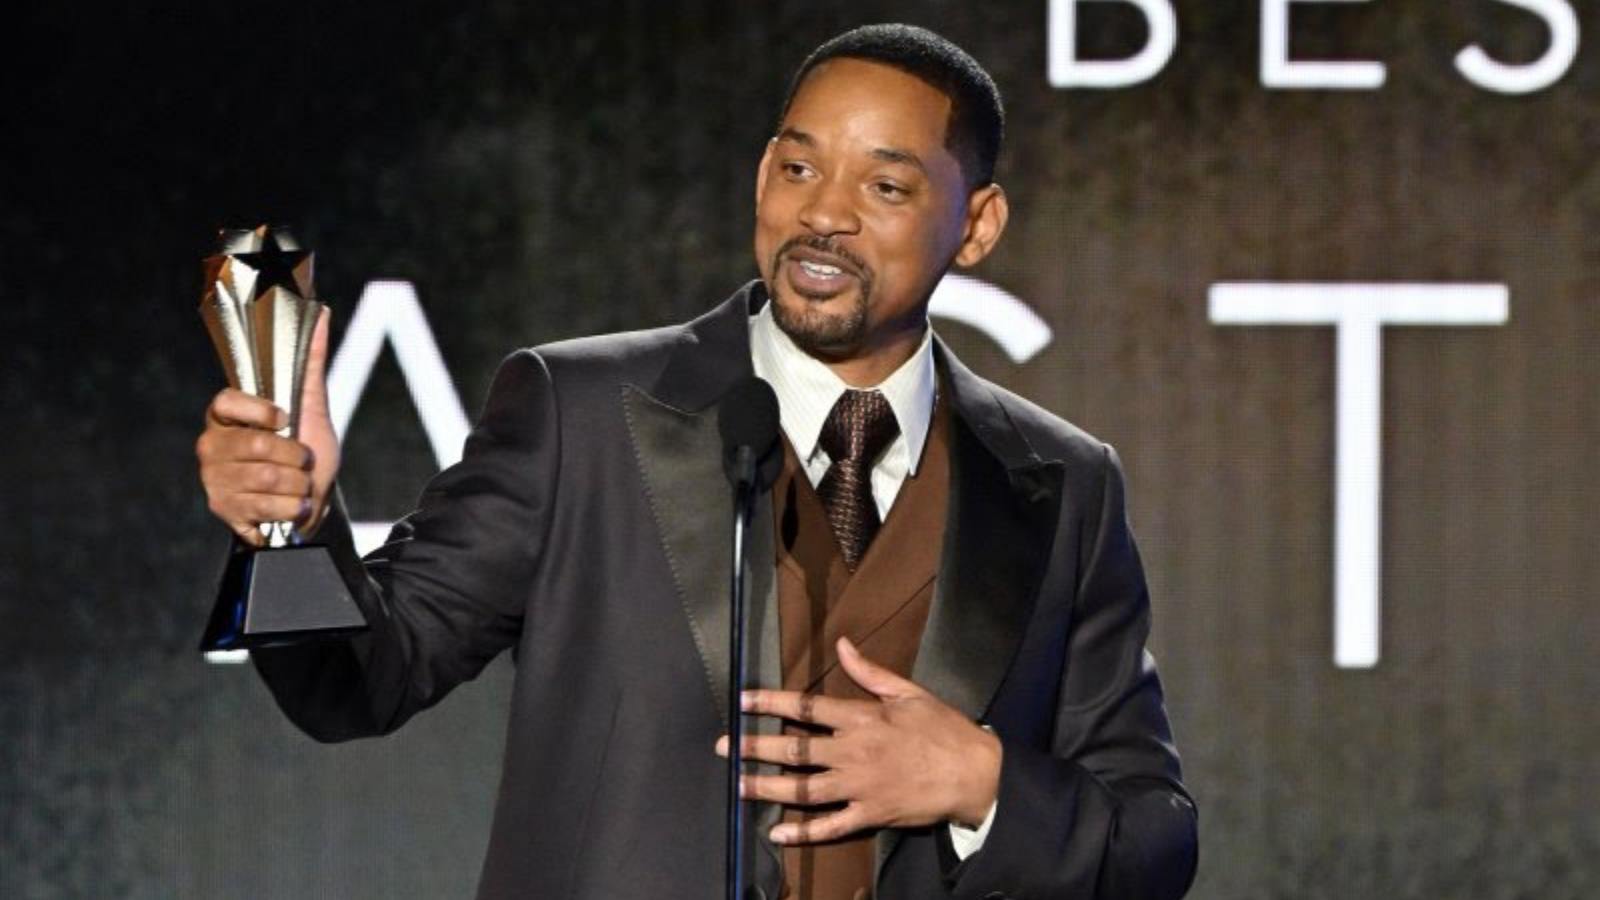 Will Smith accepts his award at the ceremony 